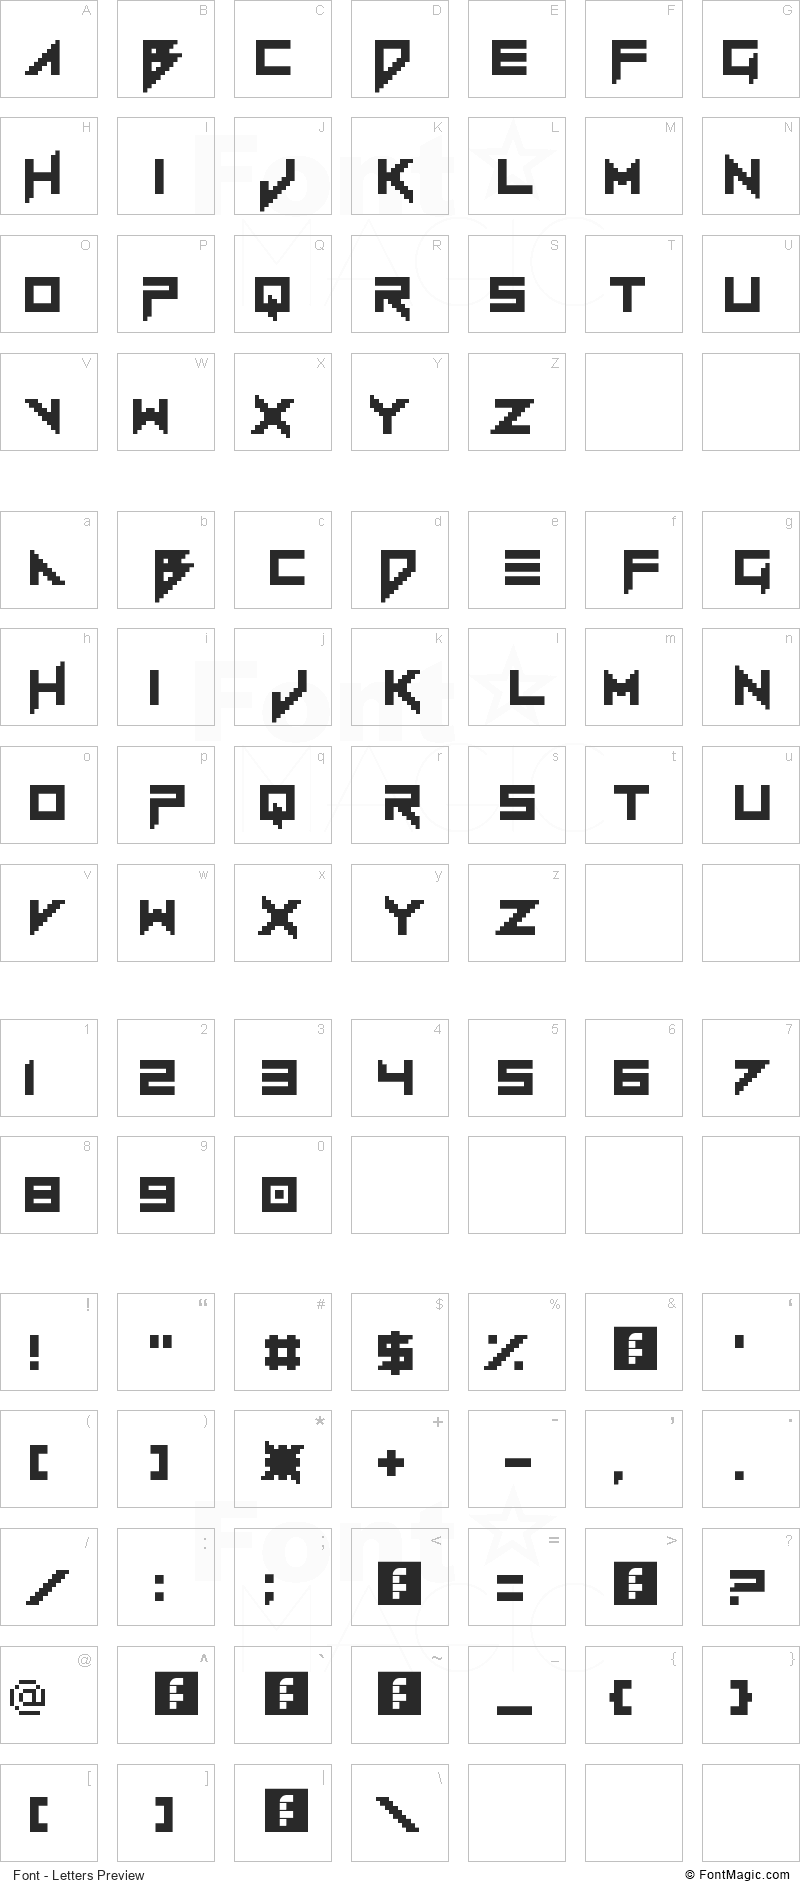 Vermin Vibes 1989 Font - All Latters Preview Chart